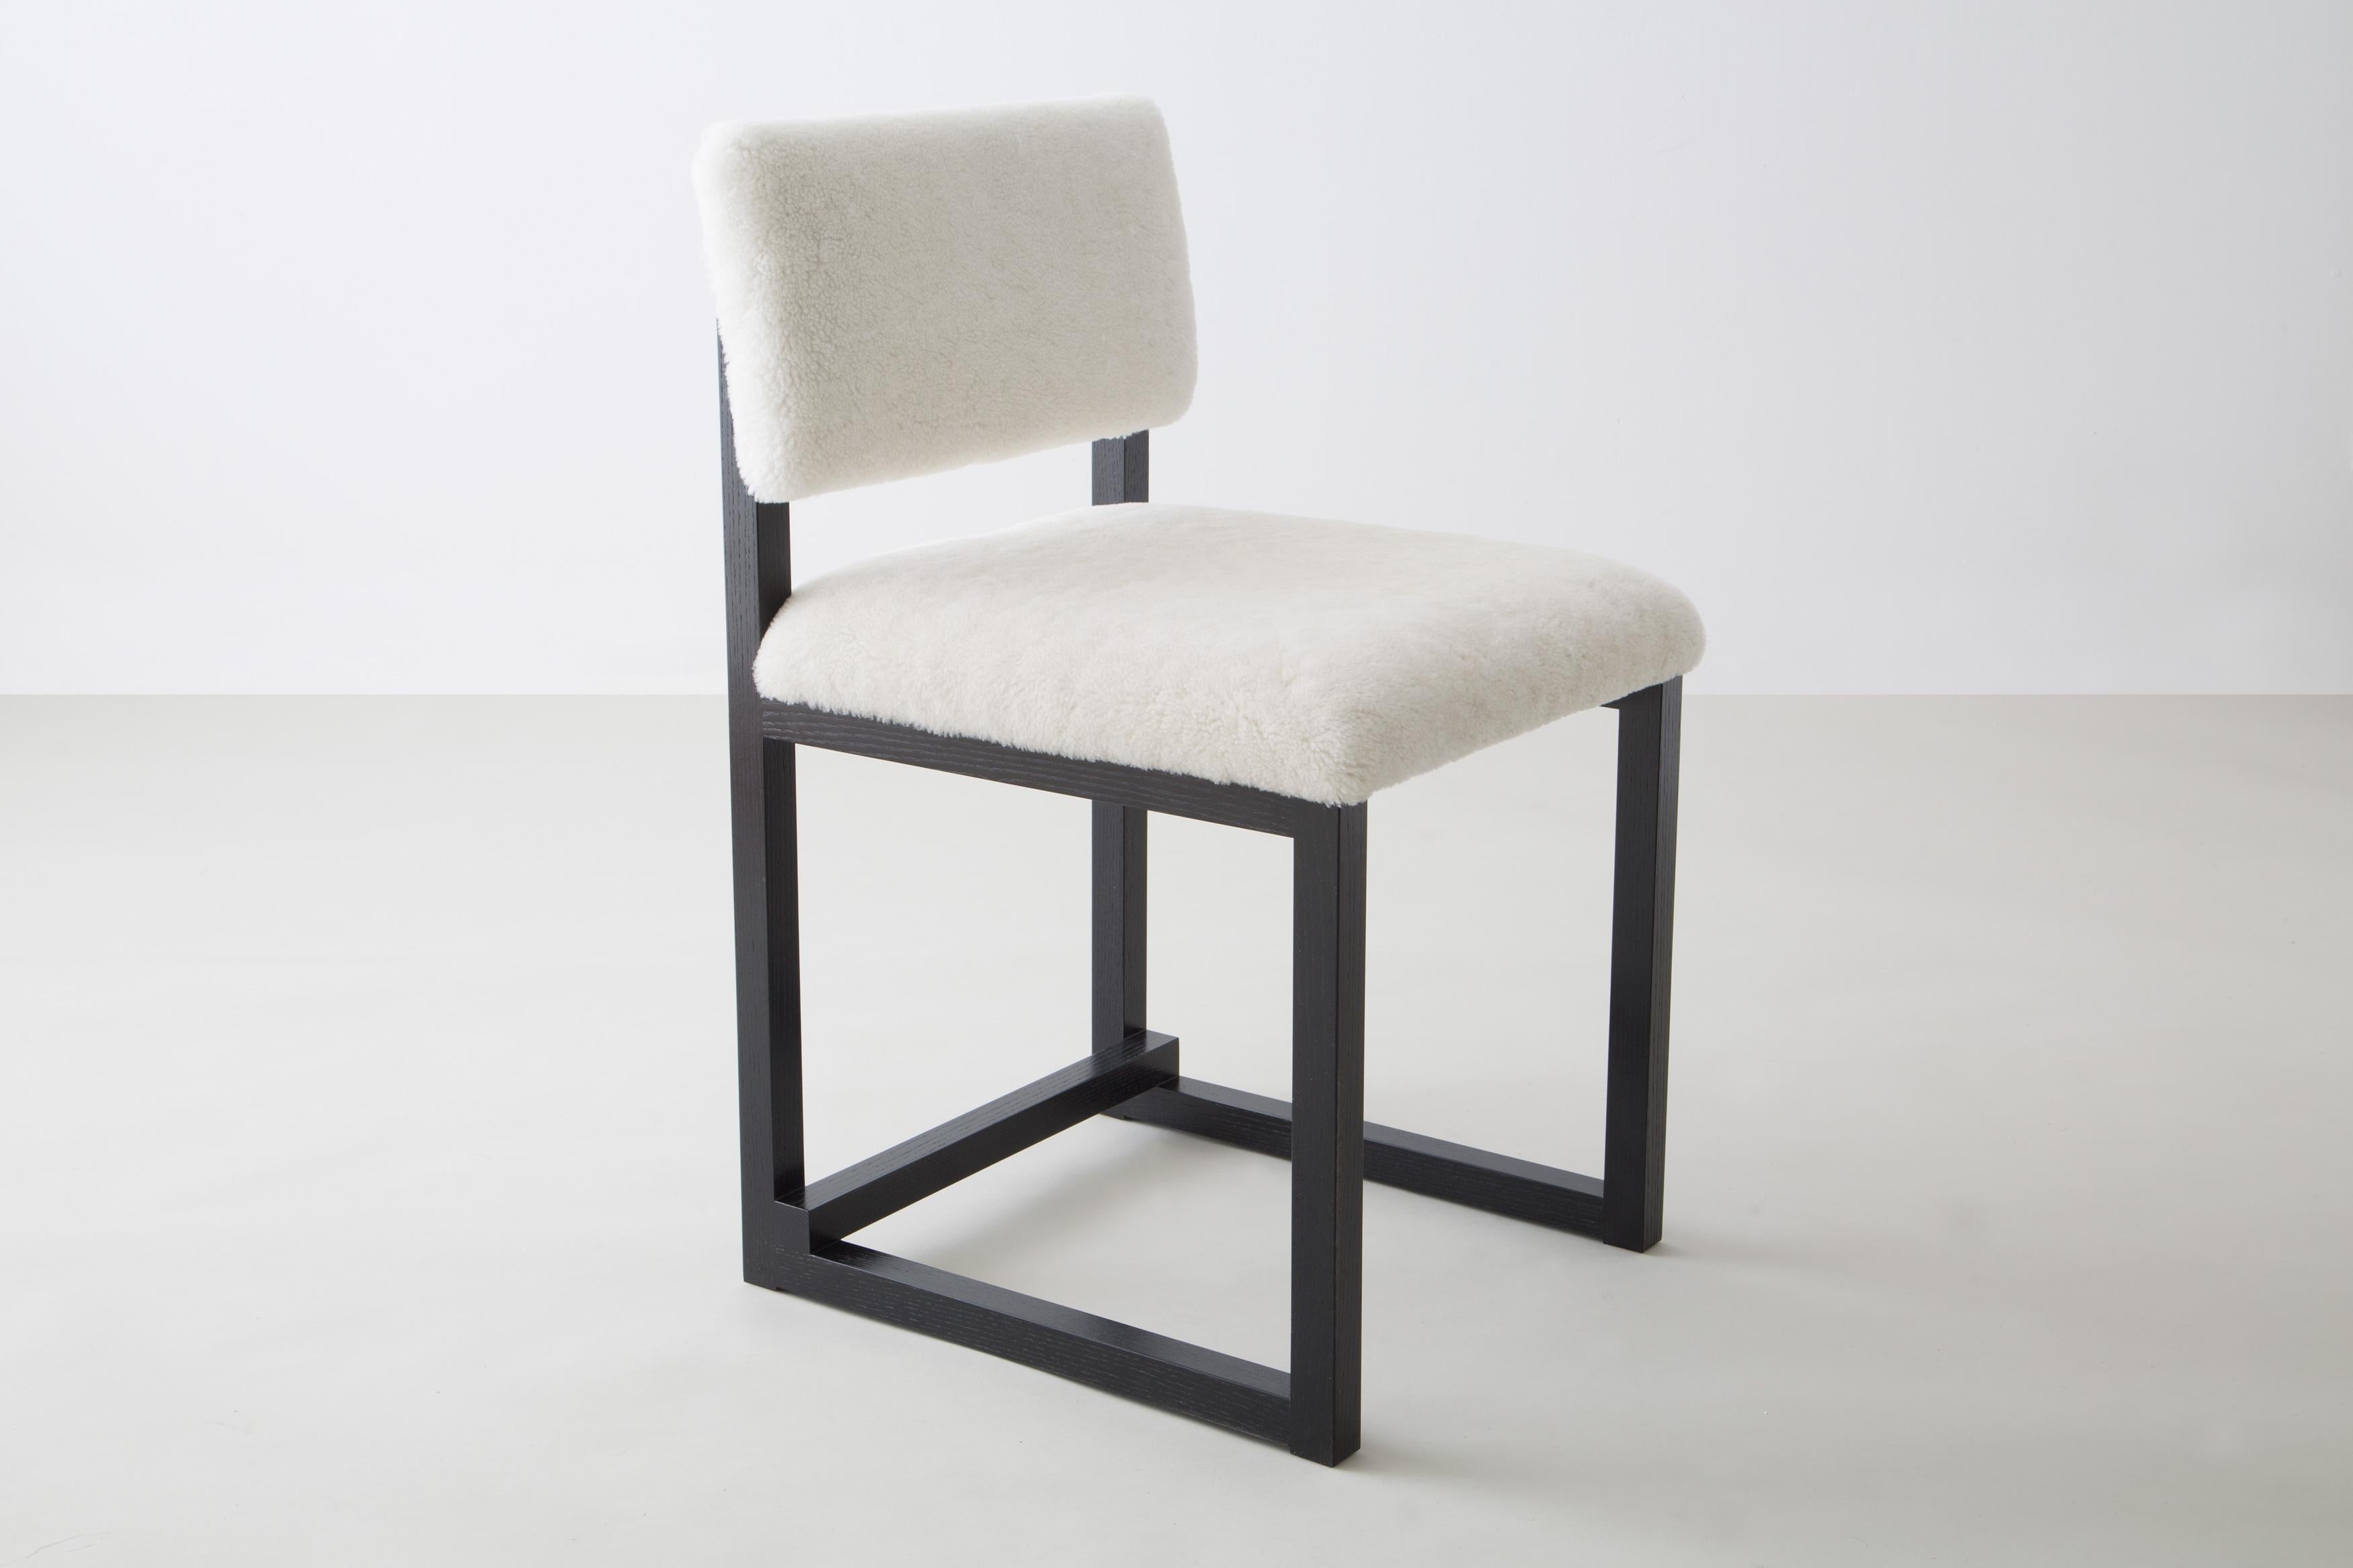 Shown in ebonized ash and white washed ash, cream shearling, and brass hardware
 
Also available:
Wood in solid ash, cherry, maple, walnut, or white oak

Upholstery in customer’s own material or leather (COM+COL) 

Metal in brushed brass, antique